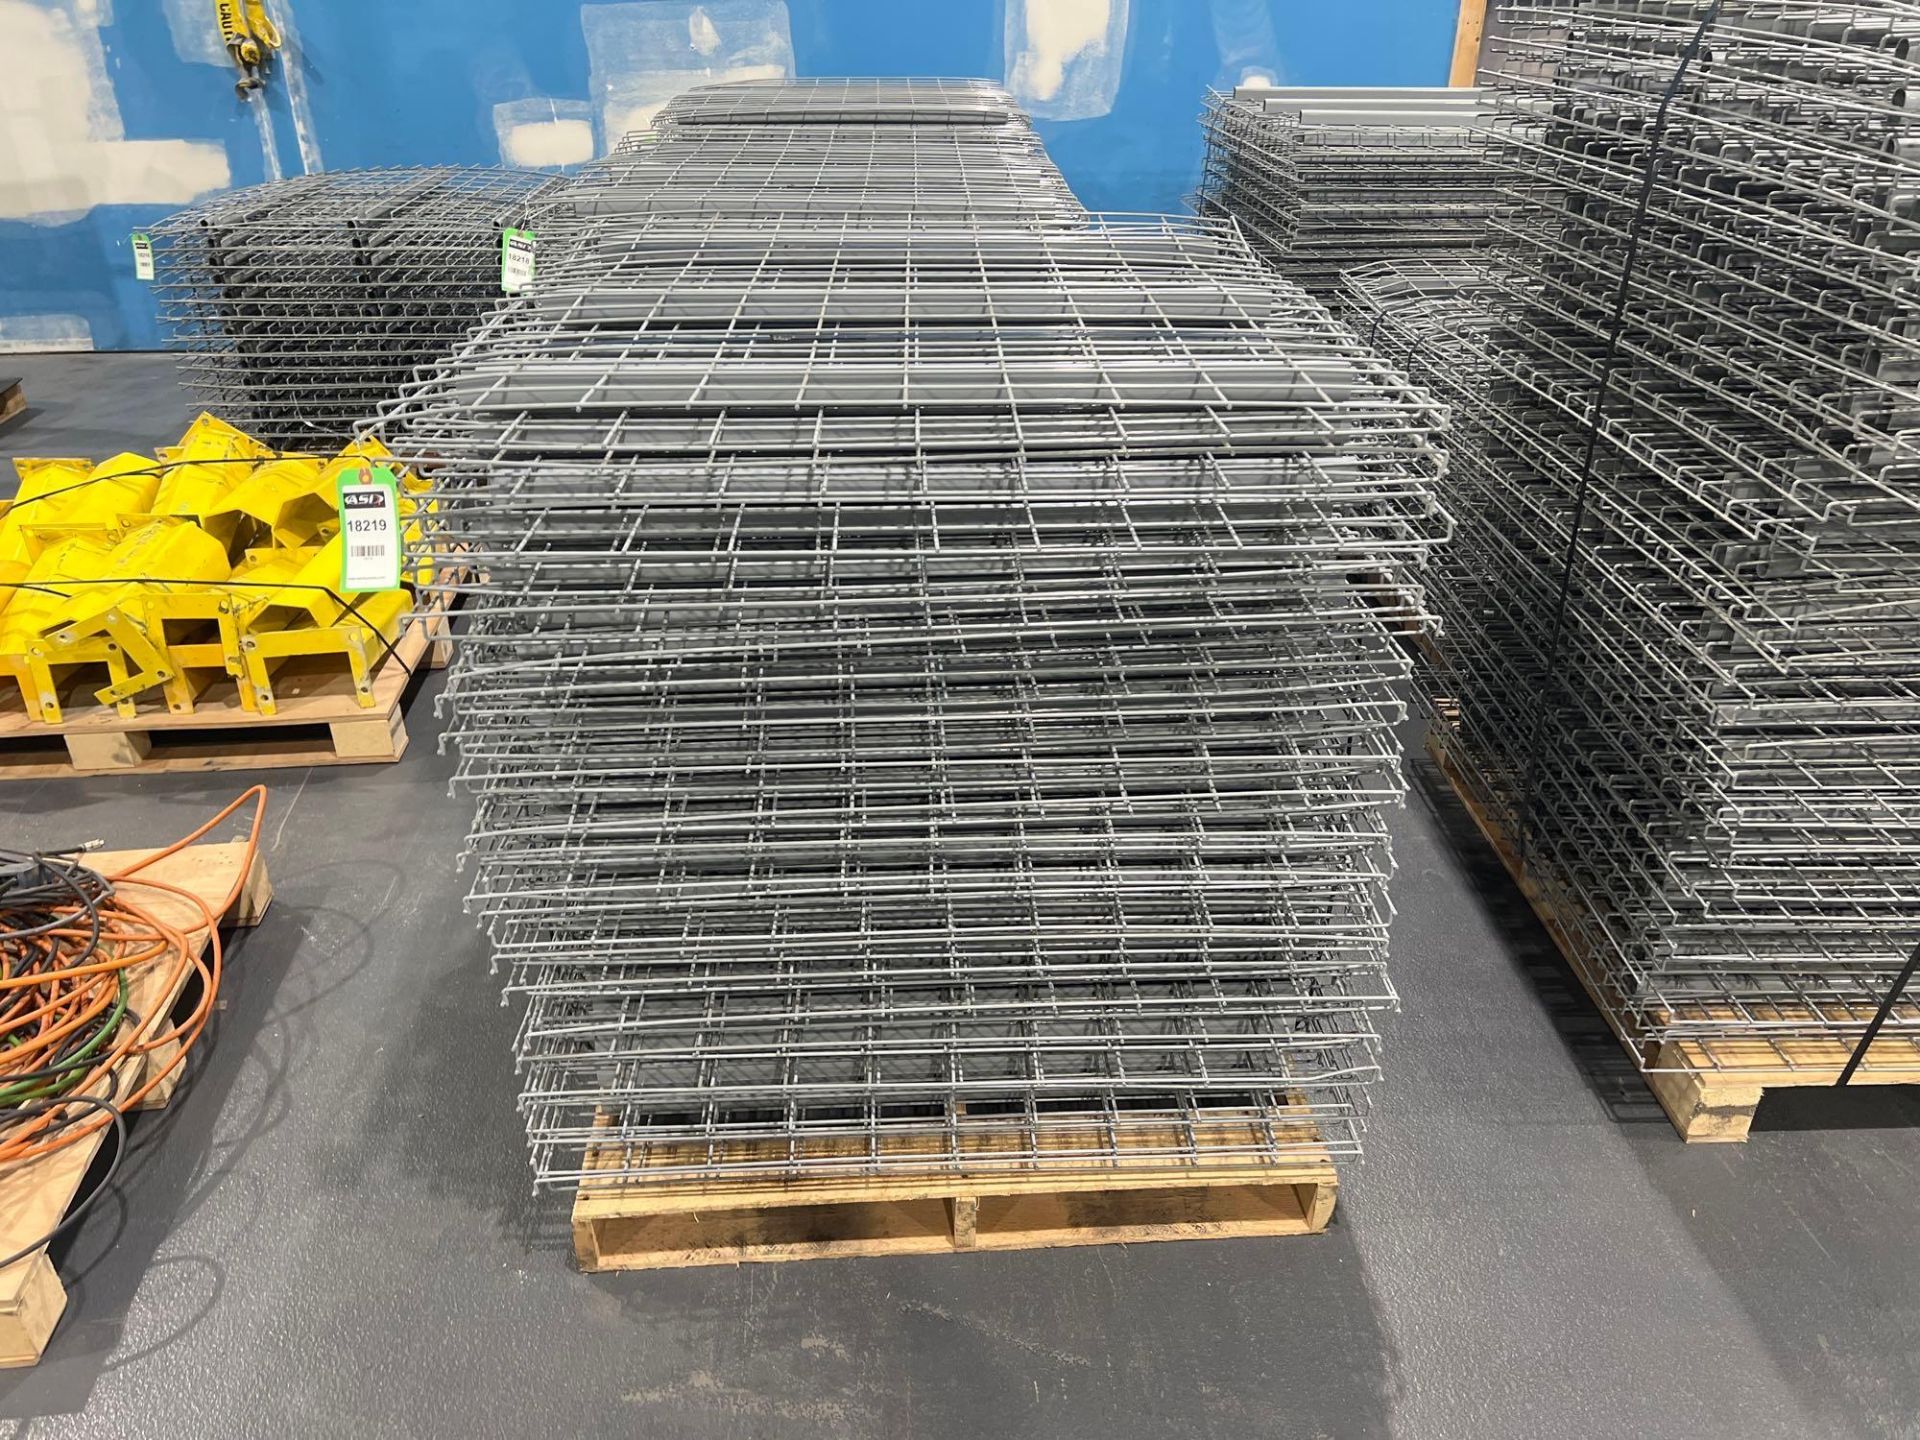 PALLET OF APPROX. 42 WIRE GRATES FOR PALLET RACKING, APPROX. DIMENSIONS 43" X 45" - Image 2 of 4